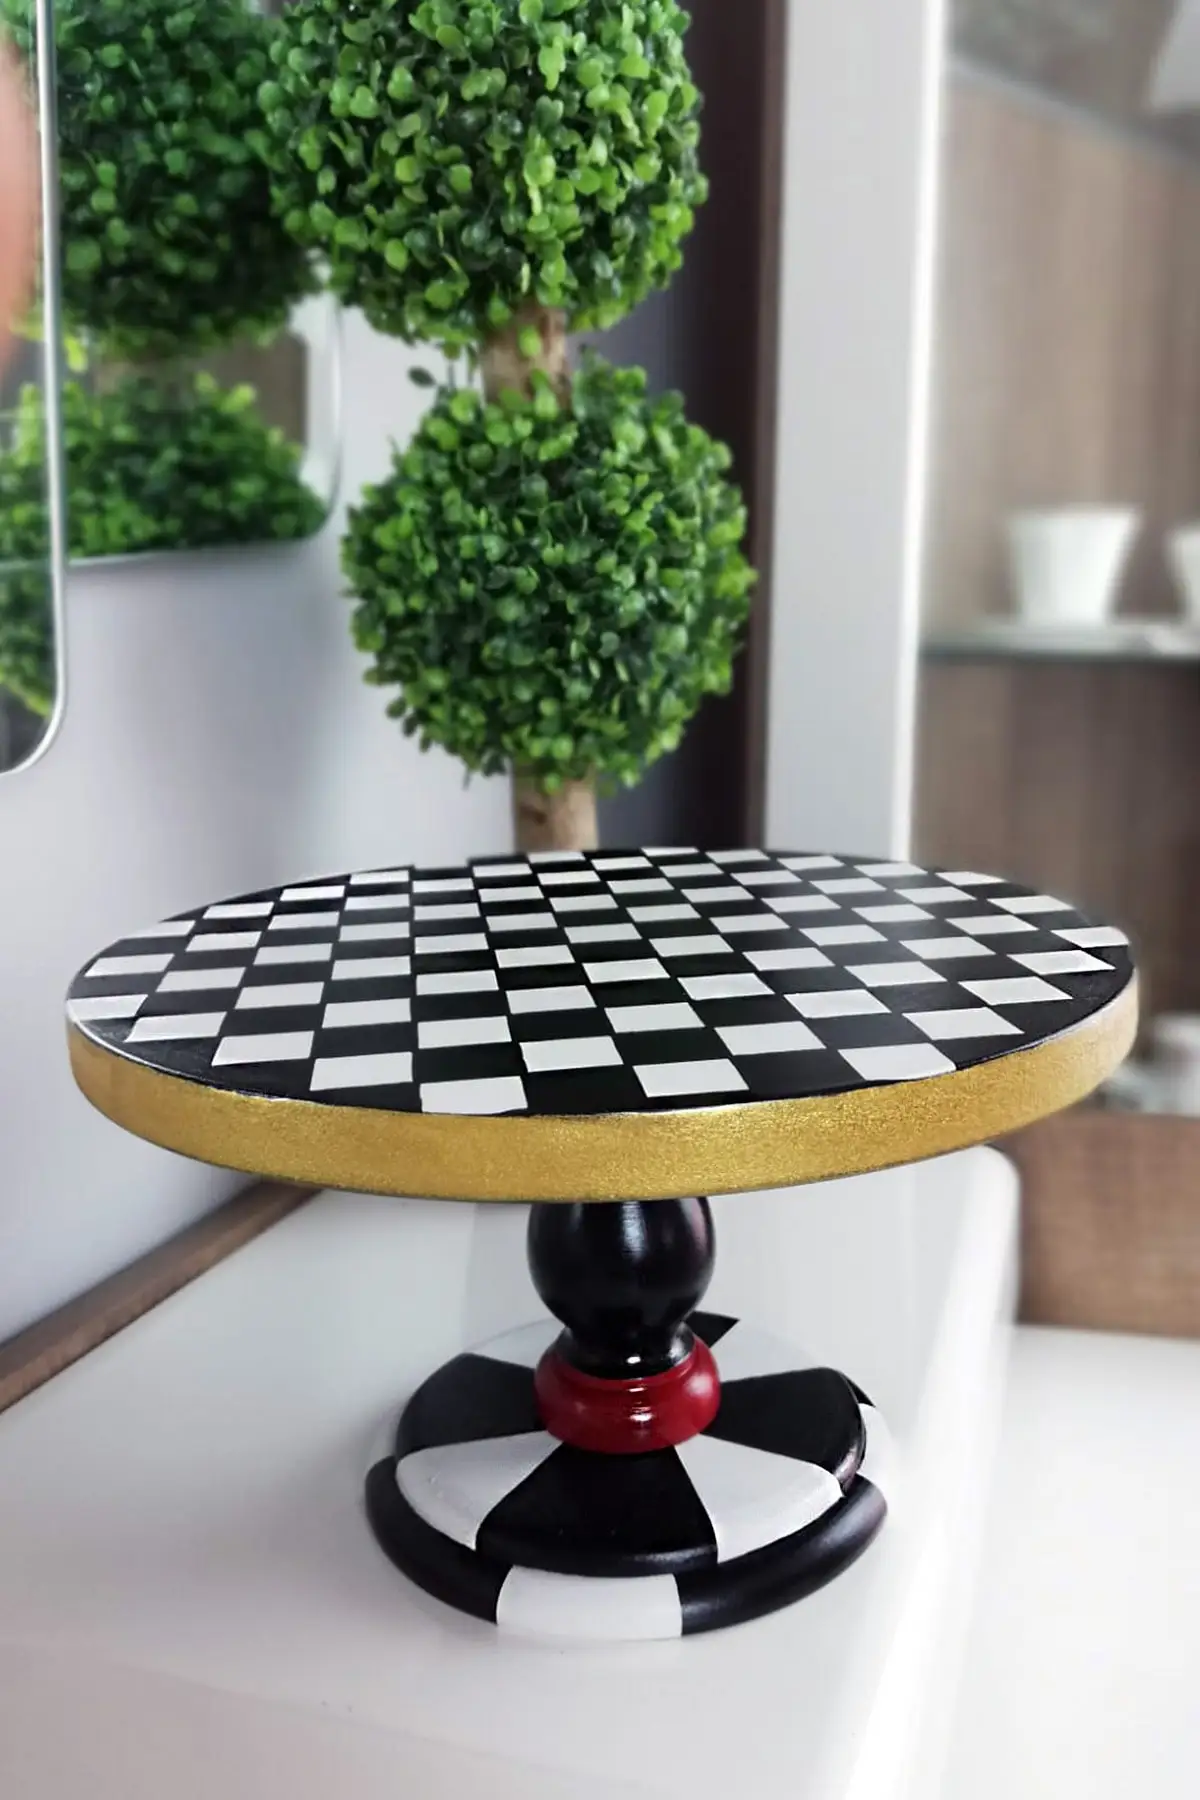 

Hand Painting Single Layer Checkered Floor Standing Ductile checkerboard pattern service dish presentation plate